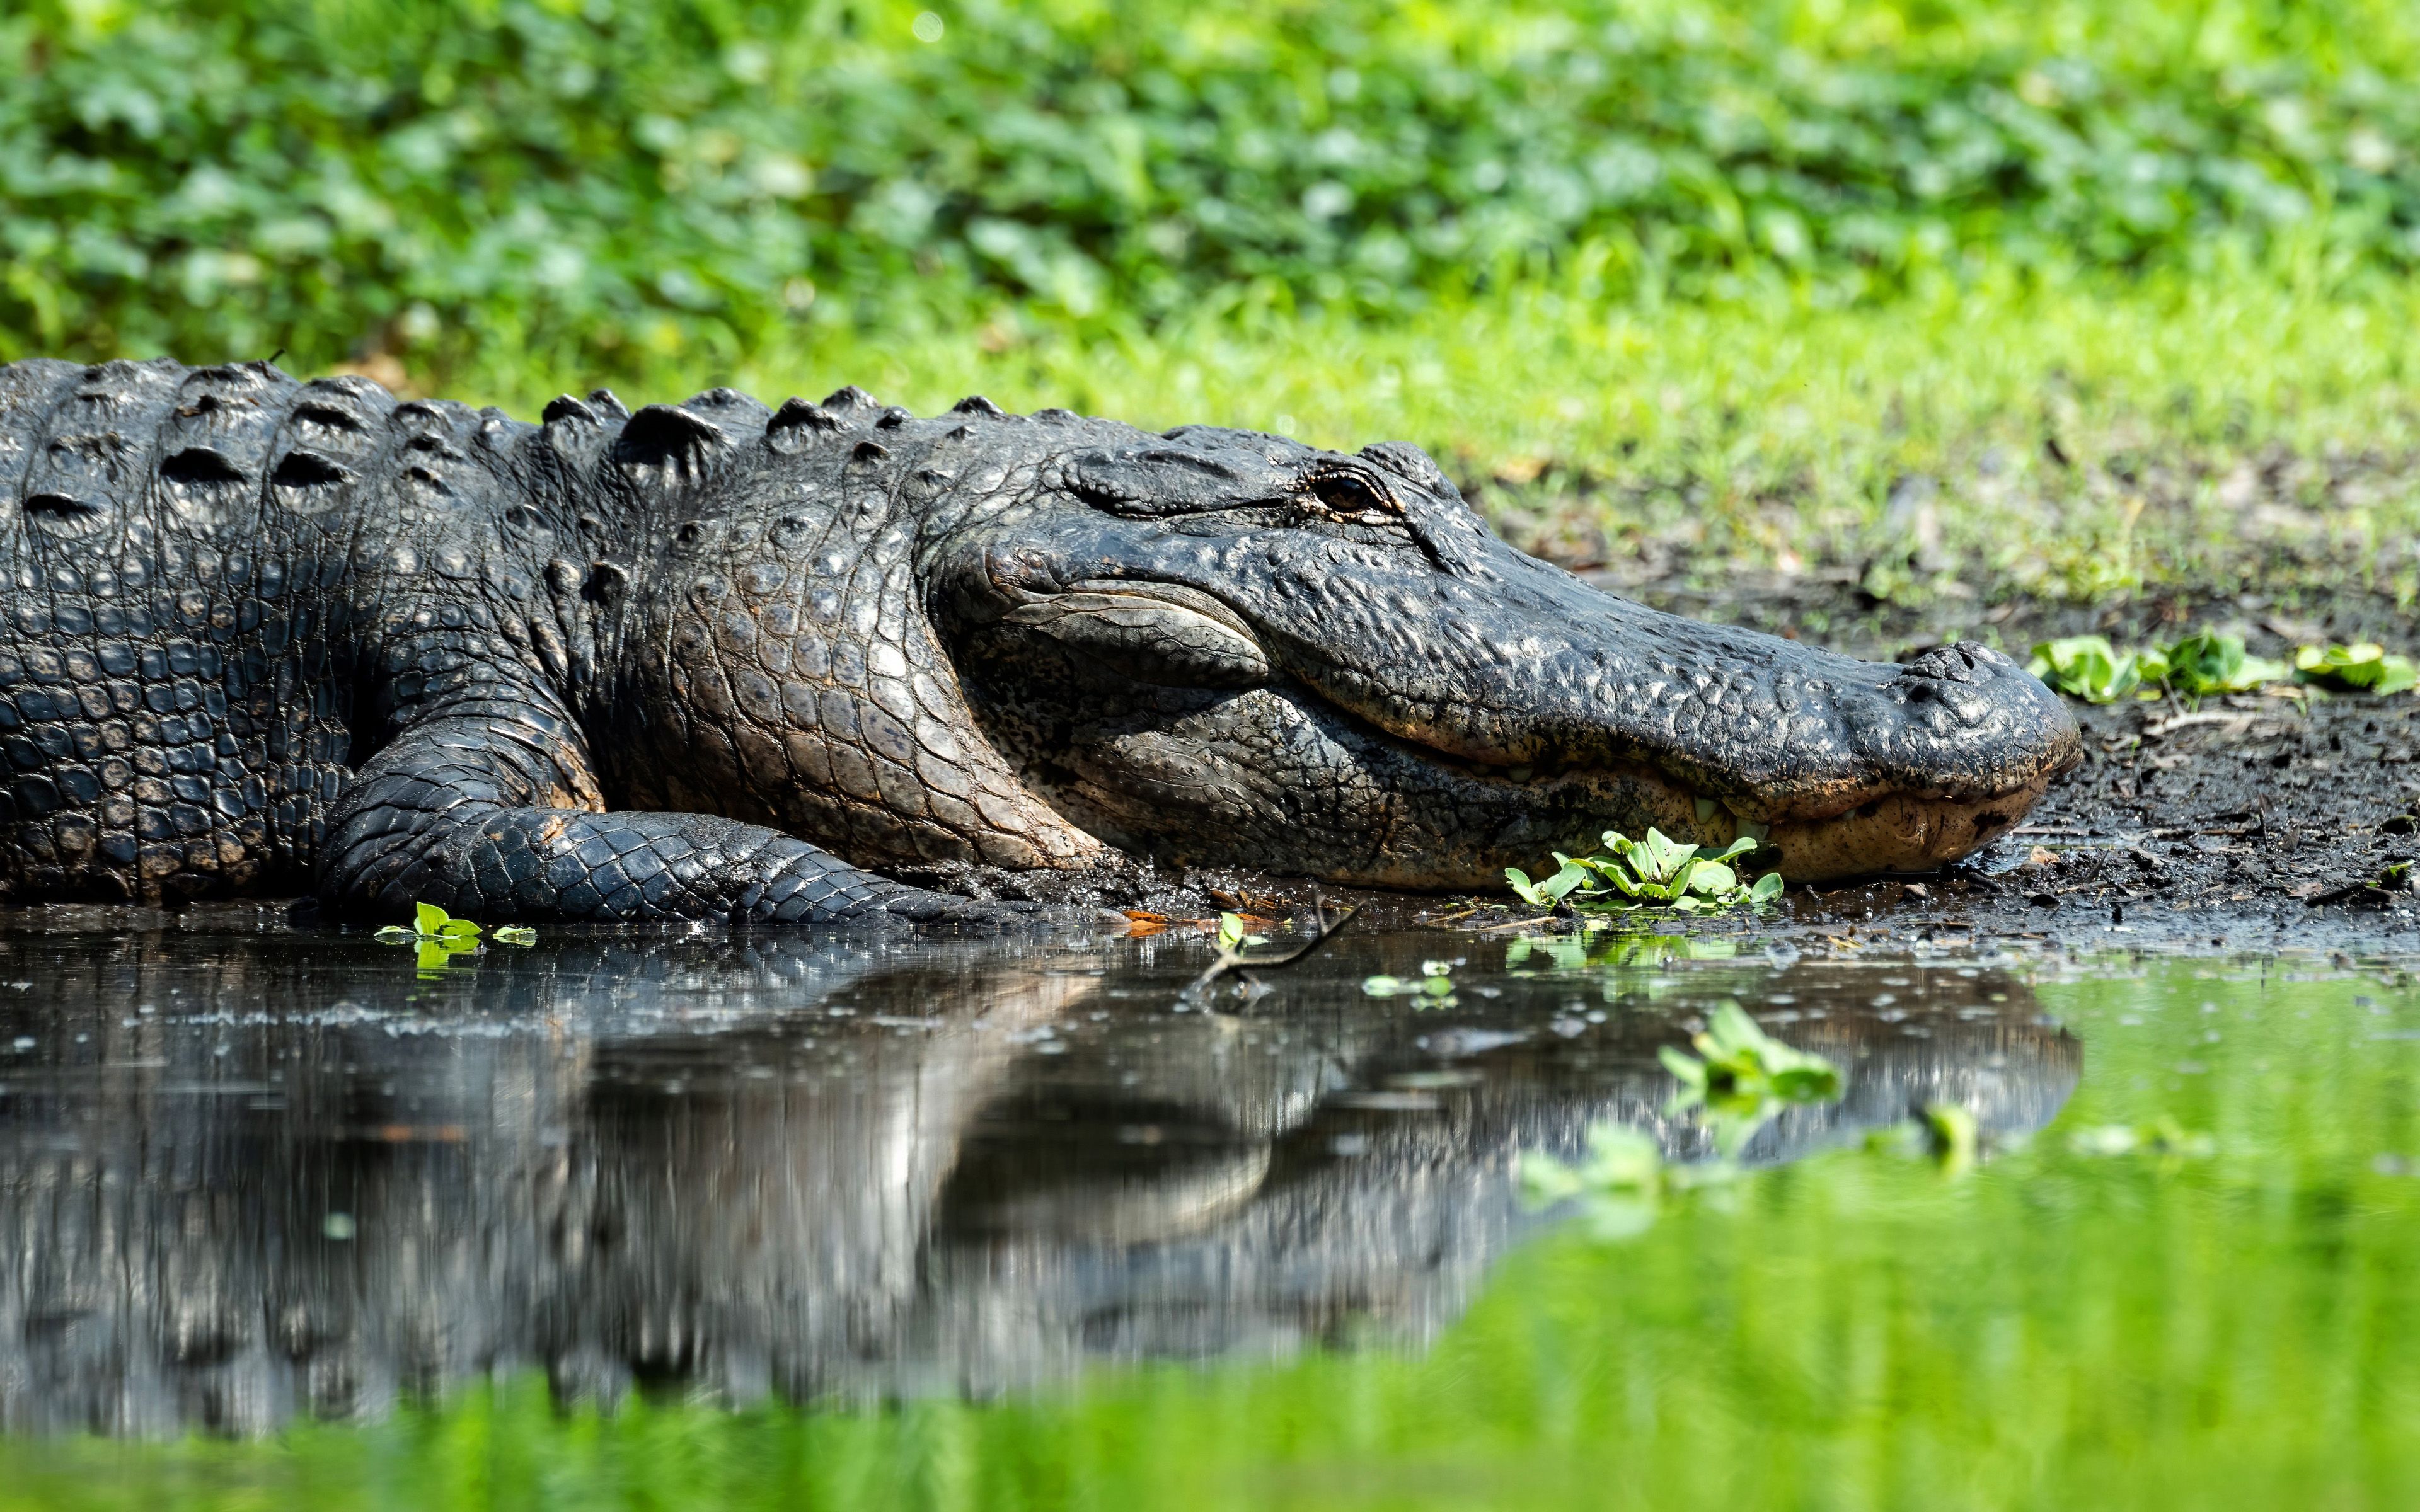 Download wallpaper Alligator, 4k, wildlife, reptile, crocodile, lake, bokeh for desktop with resolution 3840x2400. High Quality HD picture wallpaper